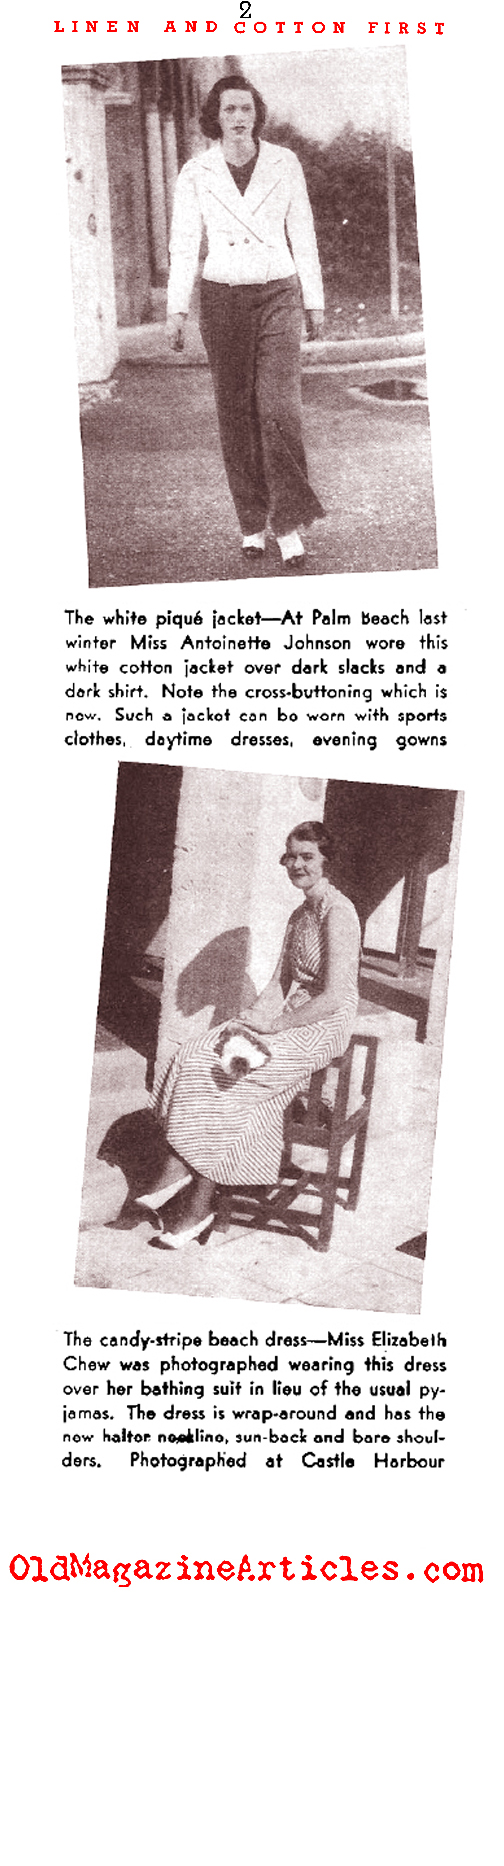 Linen and Cotton and the Summer of 1933 (Delineator Magazine, 1933)